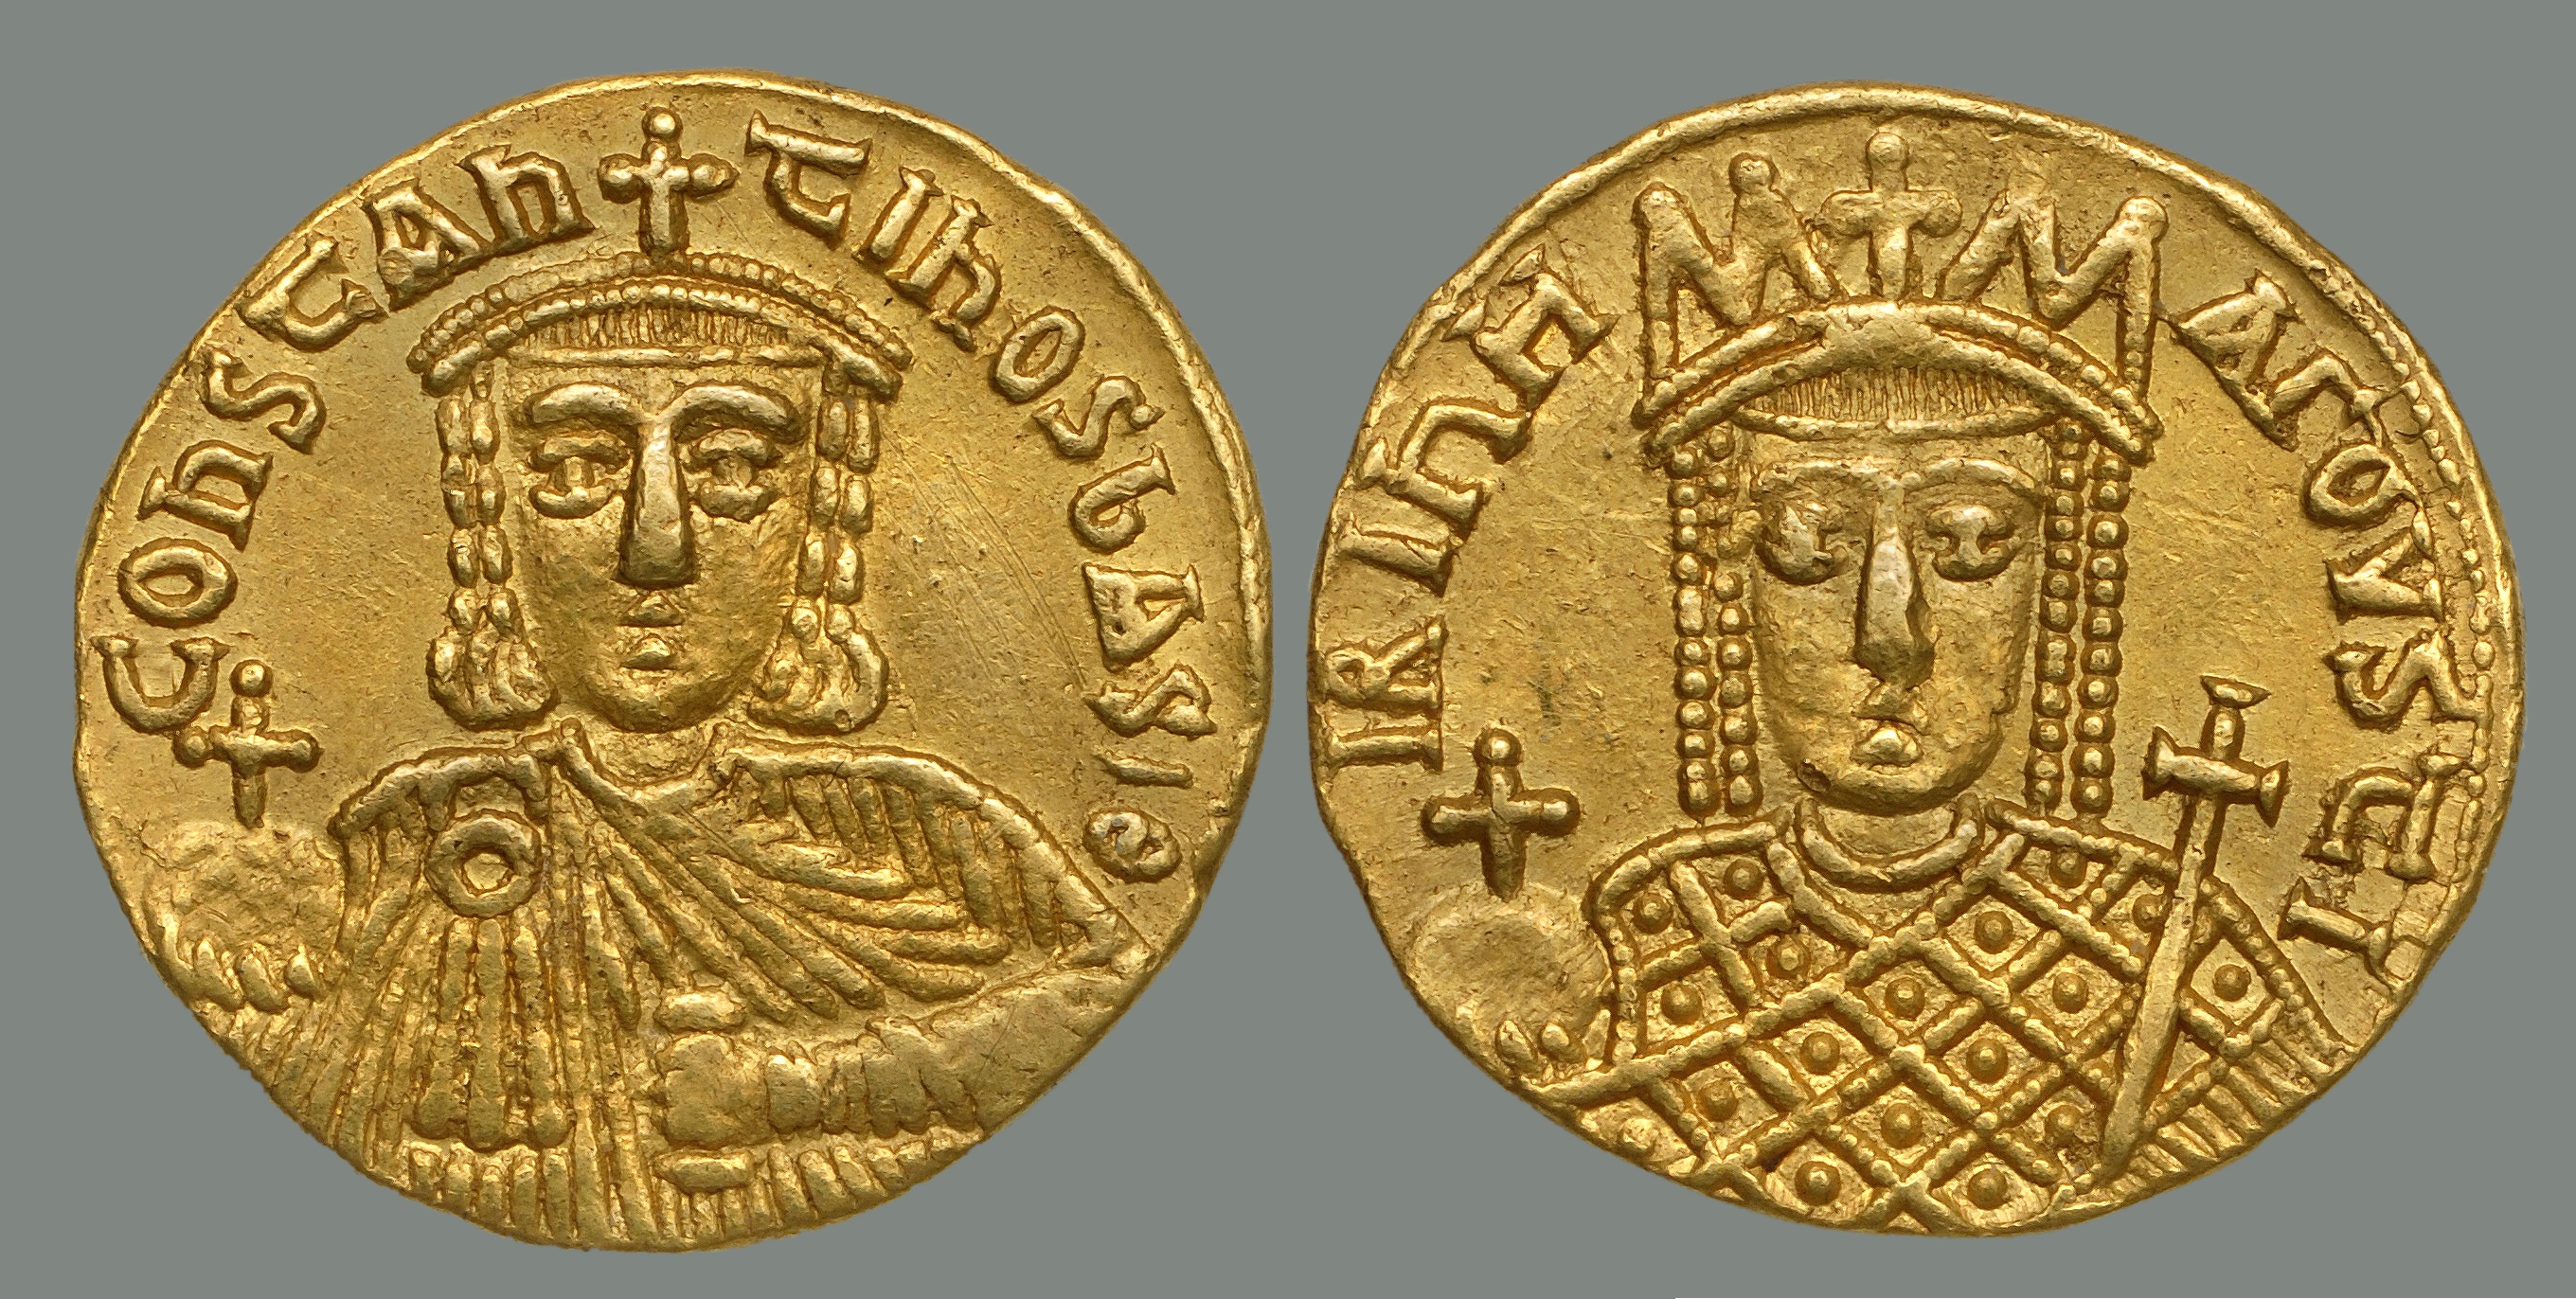 solidus-of-constantine-vi-and-irene-from-dumbarton-oaks-collection